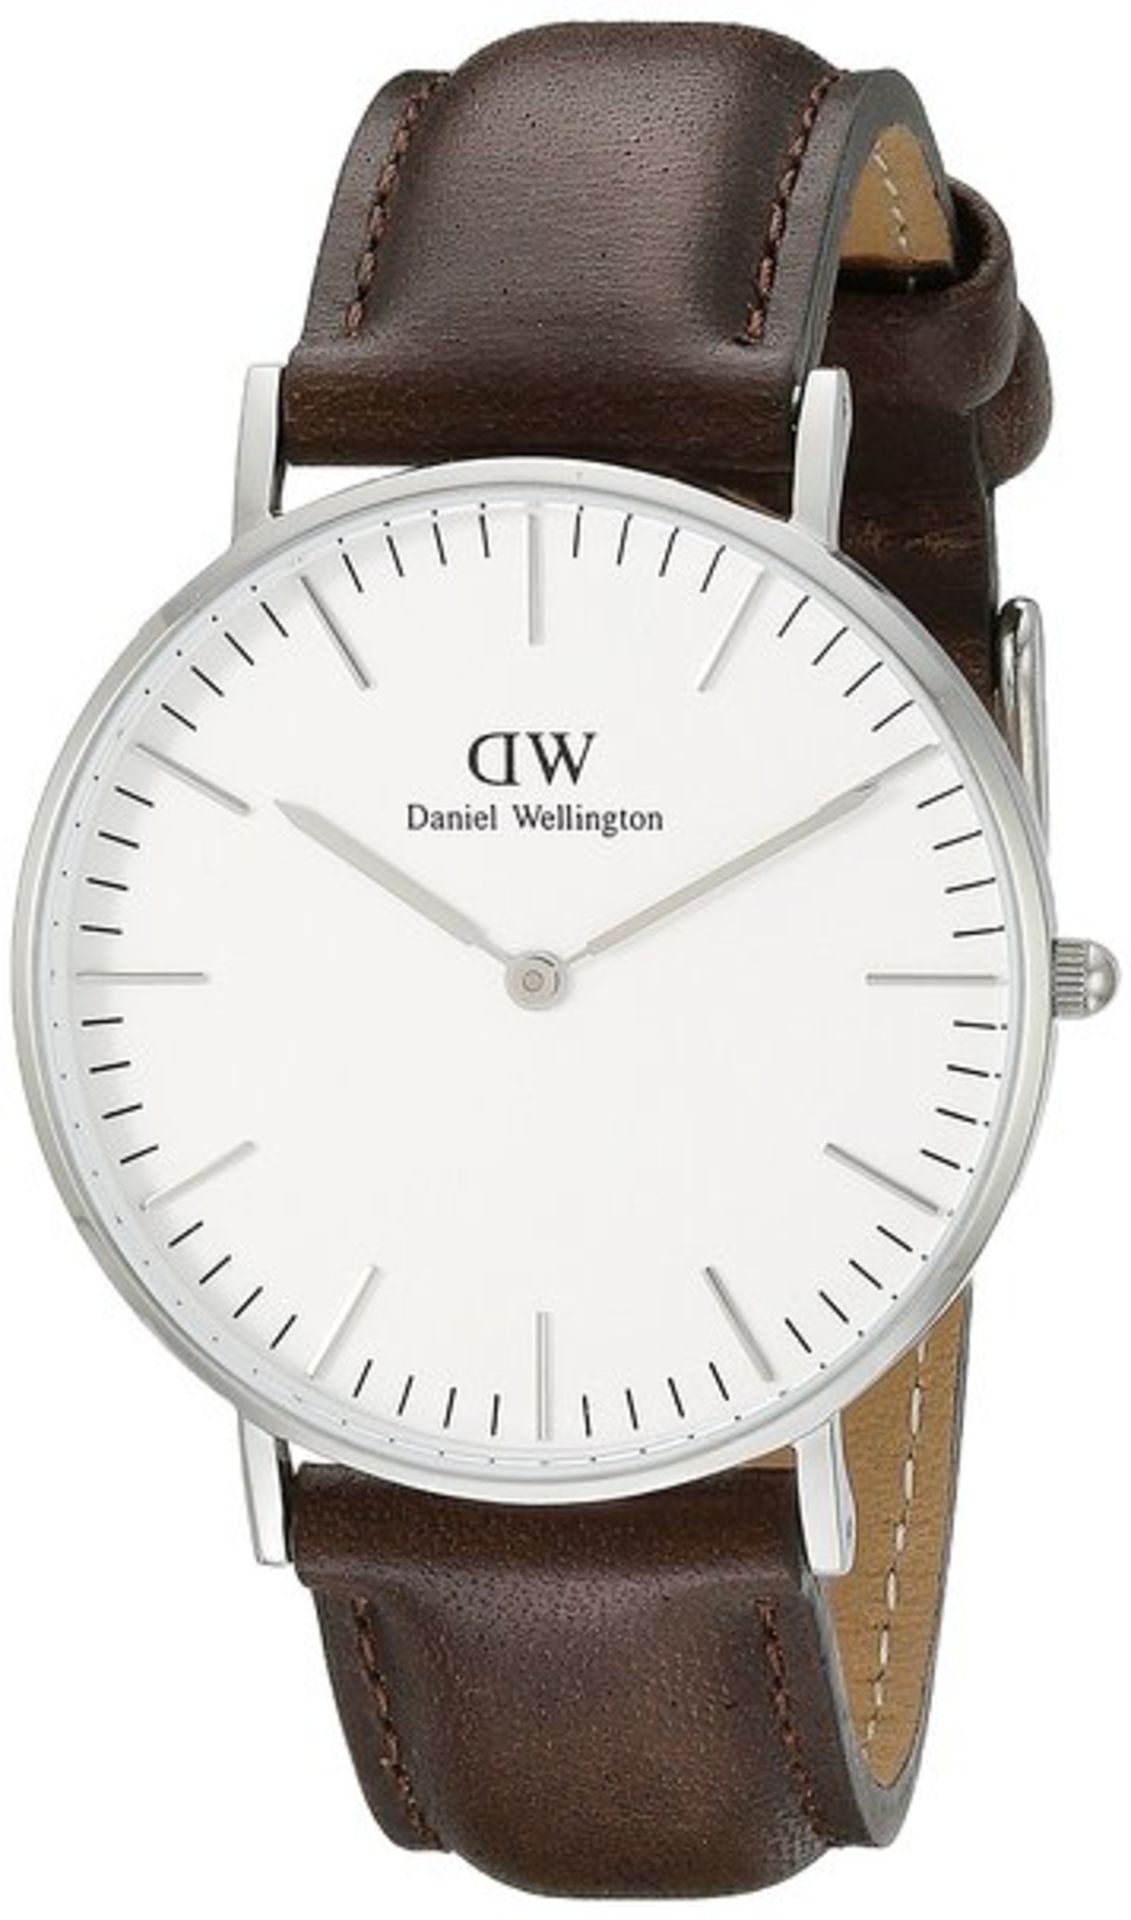 Daniel Wellington Ladies Watch Bristol 0611Dw Analogue Display And Gold Leather